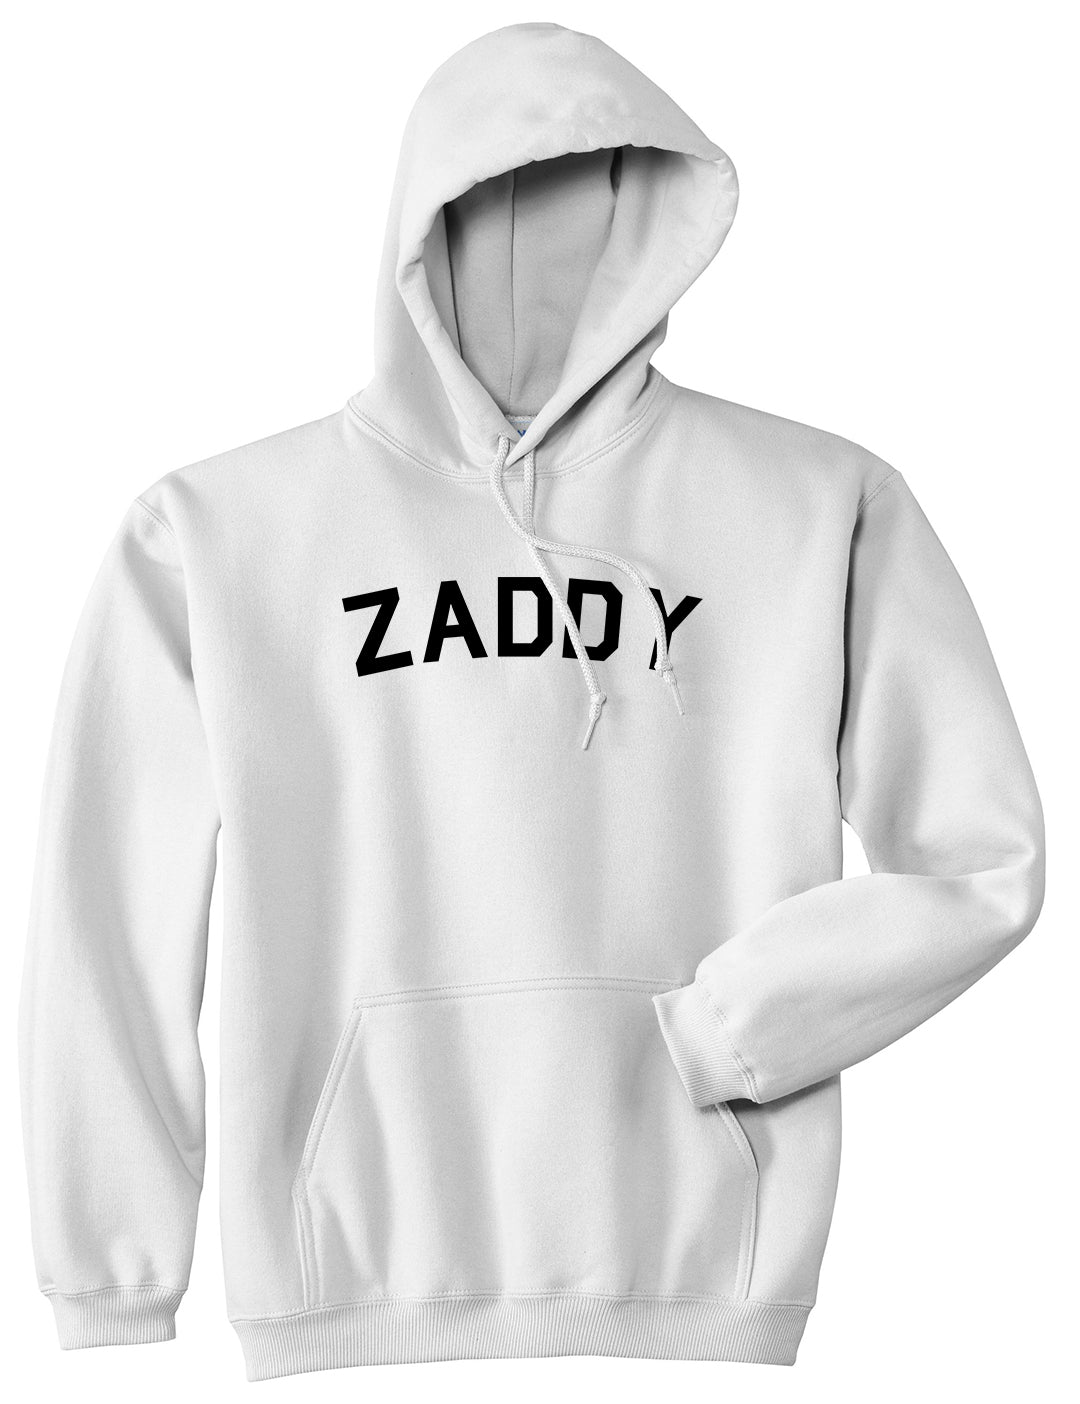 Zaddy Mens Pullover Hoodie White